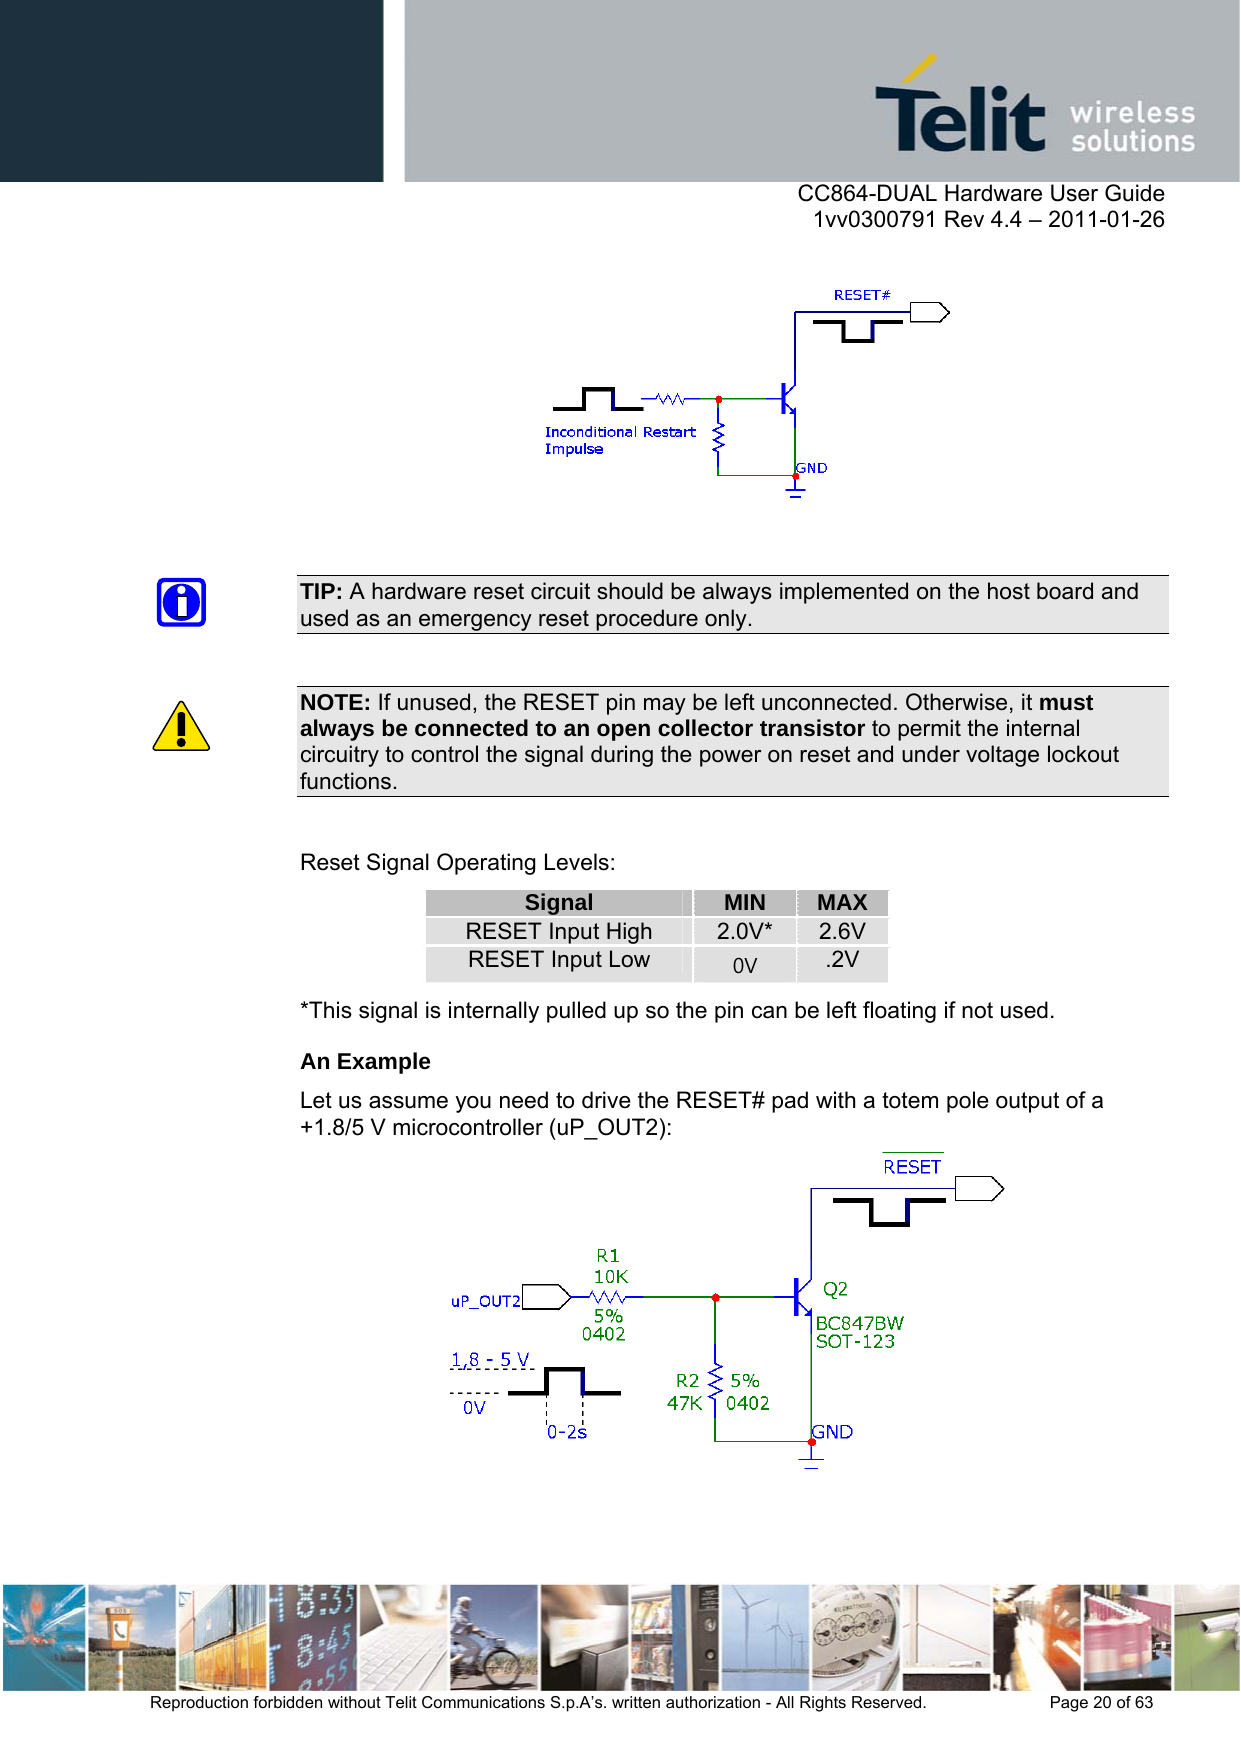      CC864-DUAL Hardware User Guide    1vv0300791 Rev 4.4 – 2011-01-26  Reproduction forbidden without Telit Communications S.p.A’s. written authorization - All Rights Reserved.    Page 20 of 63    TIP: A hardware reset circuit should be always implemented on the host board and used as an emergency reset procedure only.  NOTE: If unused, the RESET pin may be left unconnected. Otherwise, it must always be connected to an open collector transistor to permit the internal circuitry to control the signal during the power on reset and under voltage lockout functions.  Reset Signal Operating Levels: Signal MIN MAX RESET Input High 2.0V*  2.6V RESET Input Low 0V  .2V *This signal is internally pulled up so the pin can be left floating if not used. An Example Let us assume you need to drive the RESET# pad with a totem pole output of a +1.8/5 V microcontroller (uP_OUT2):  